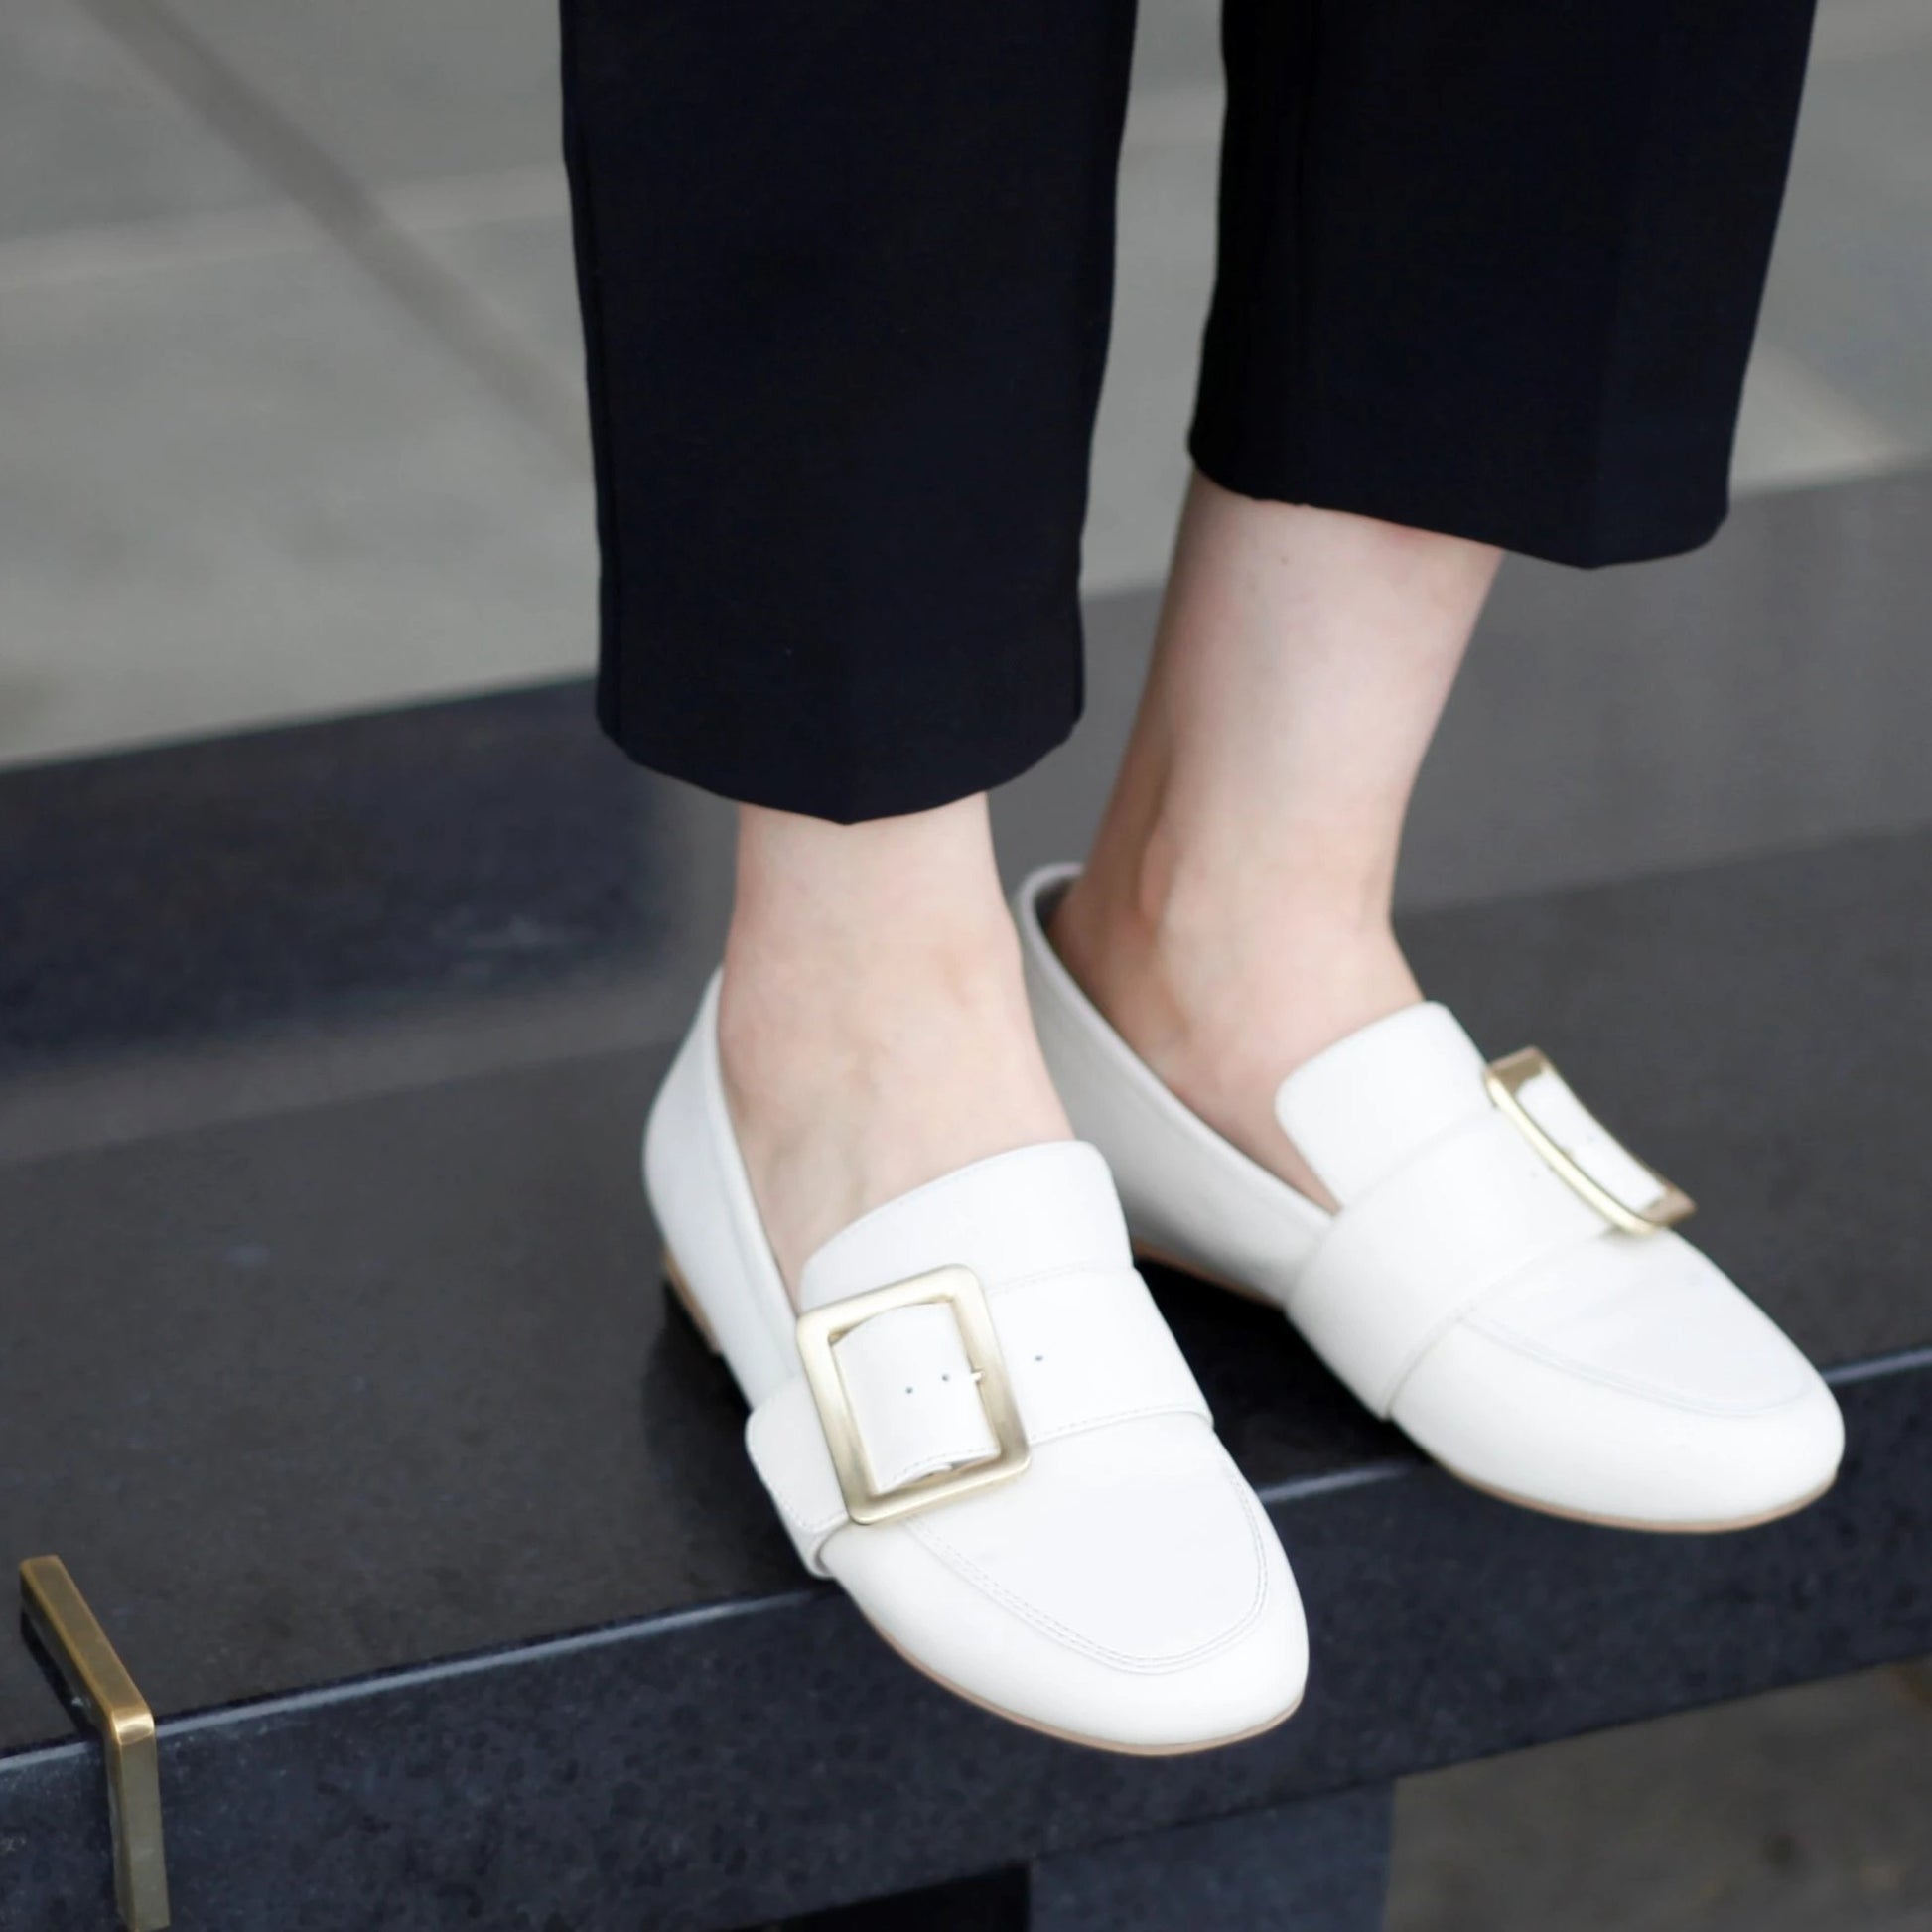 Comfortable Loafer with Arch Support and Orthotic Friendly, Wide feet friendly